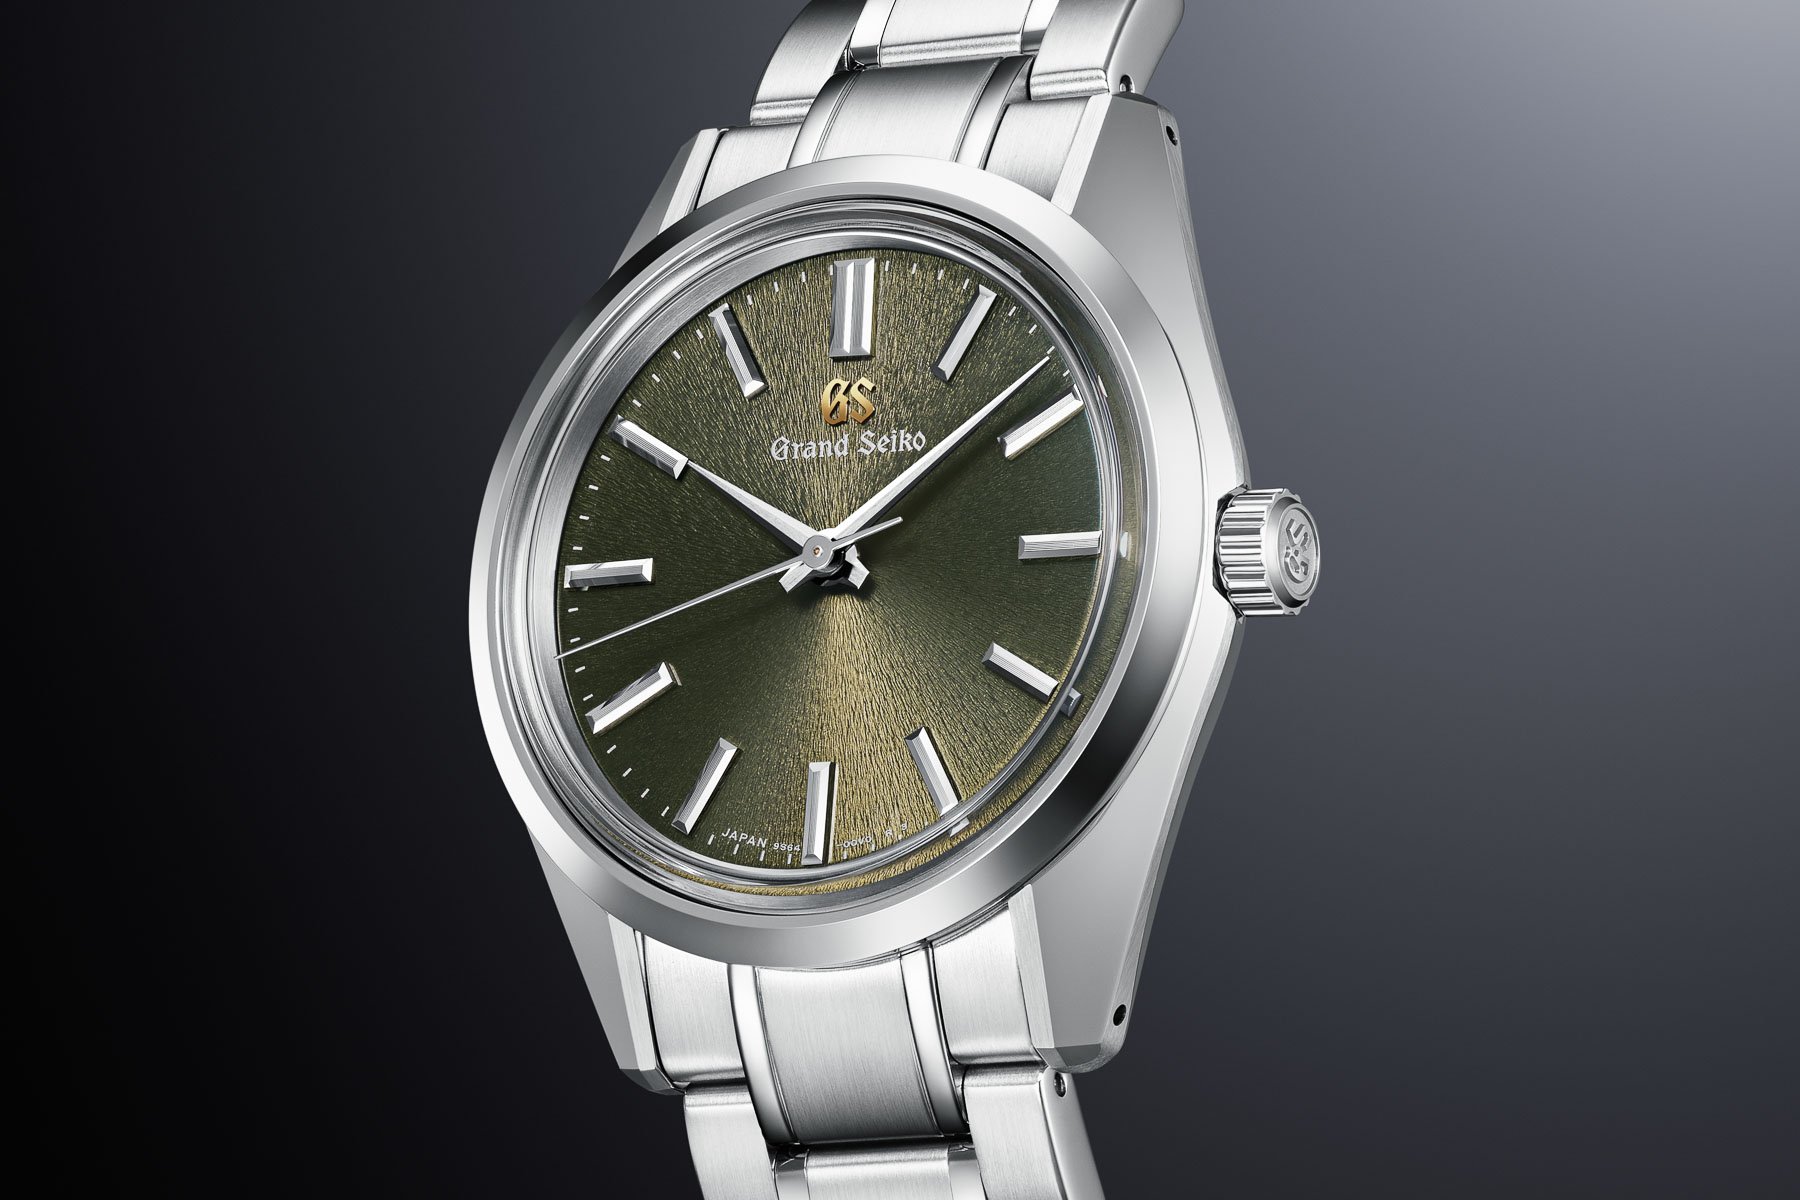 Introducing: The Grand Seiko SBGW303 — A New European Limited Edition